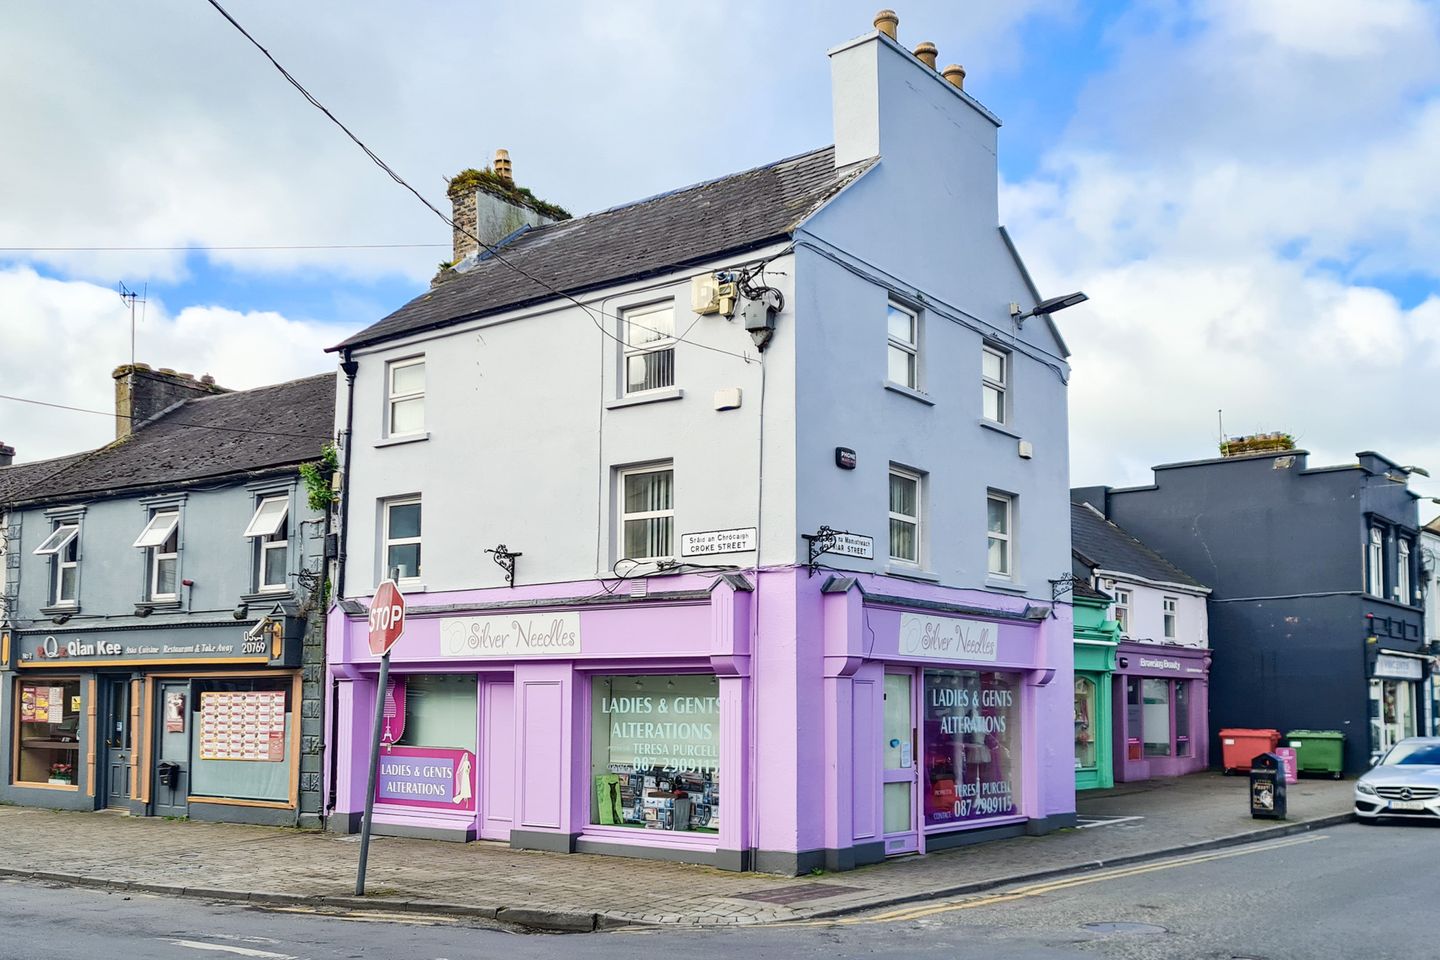 Retail / Office Premises, Friar St. / Croke St, Thurles, Co. Tipperary, E41ND28